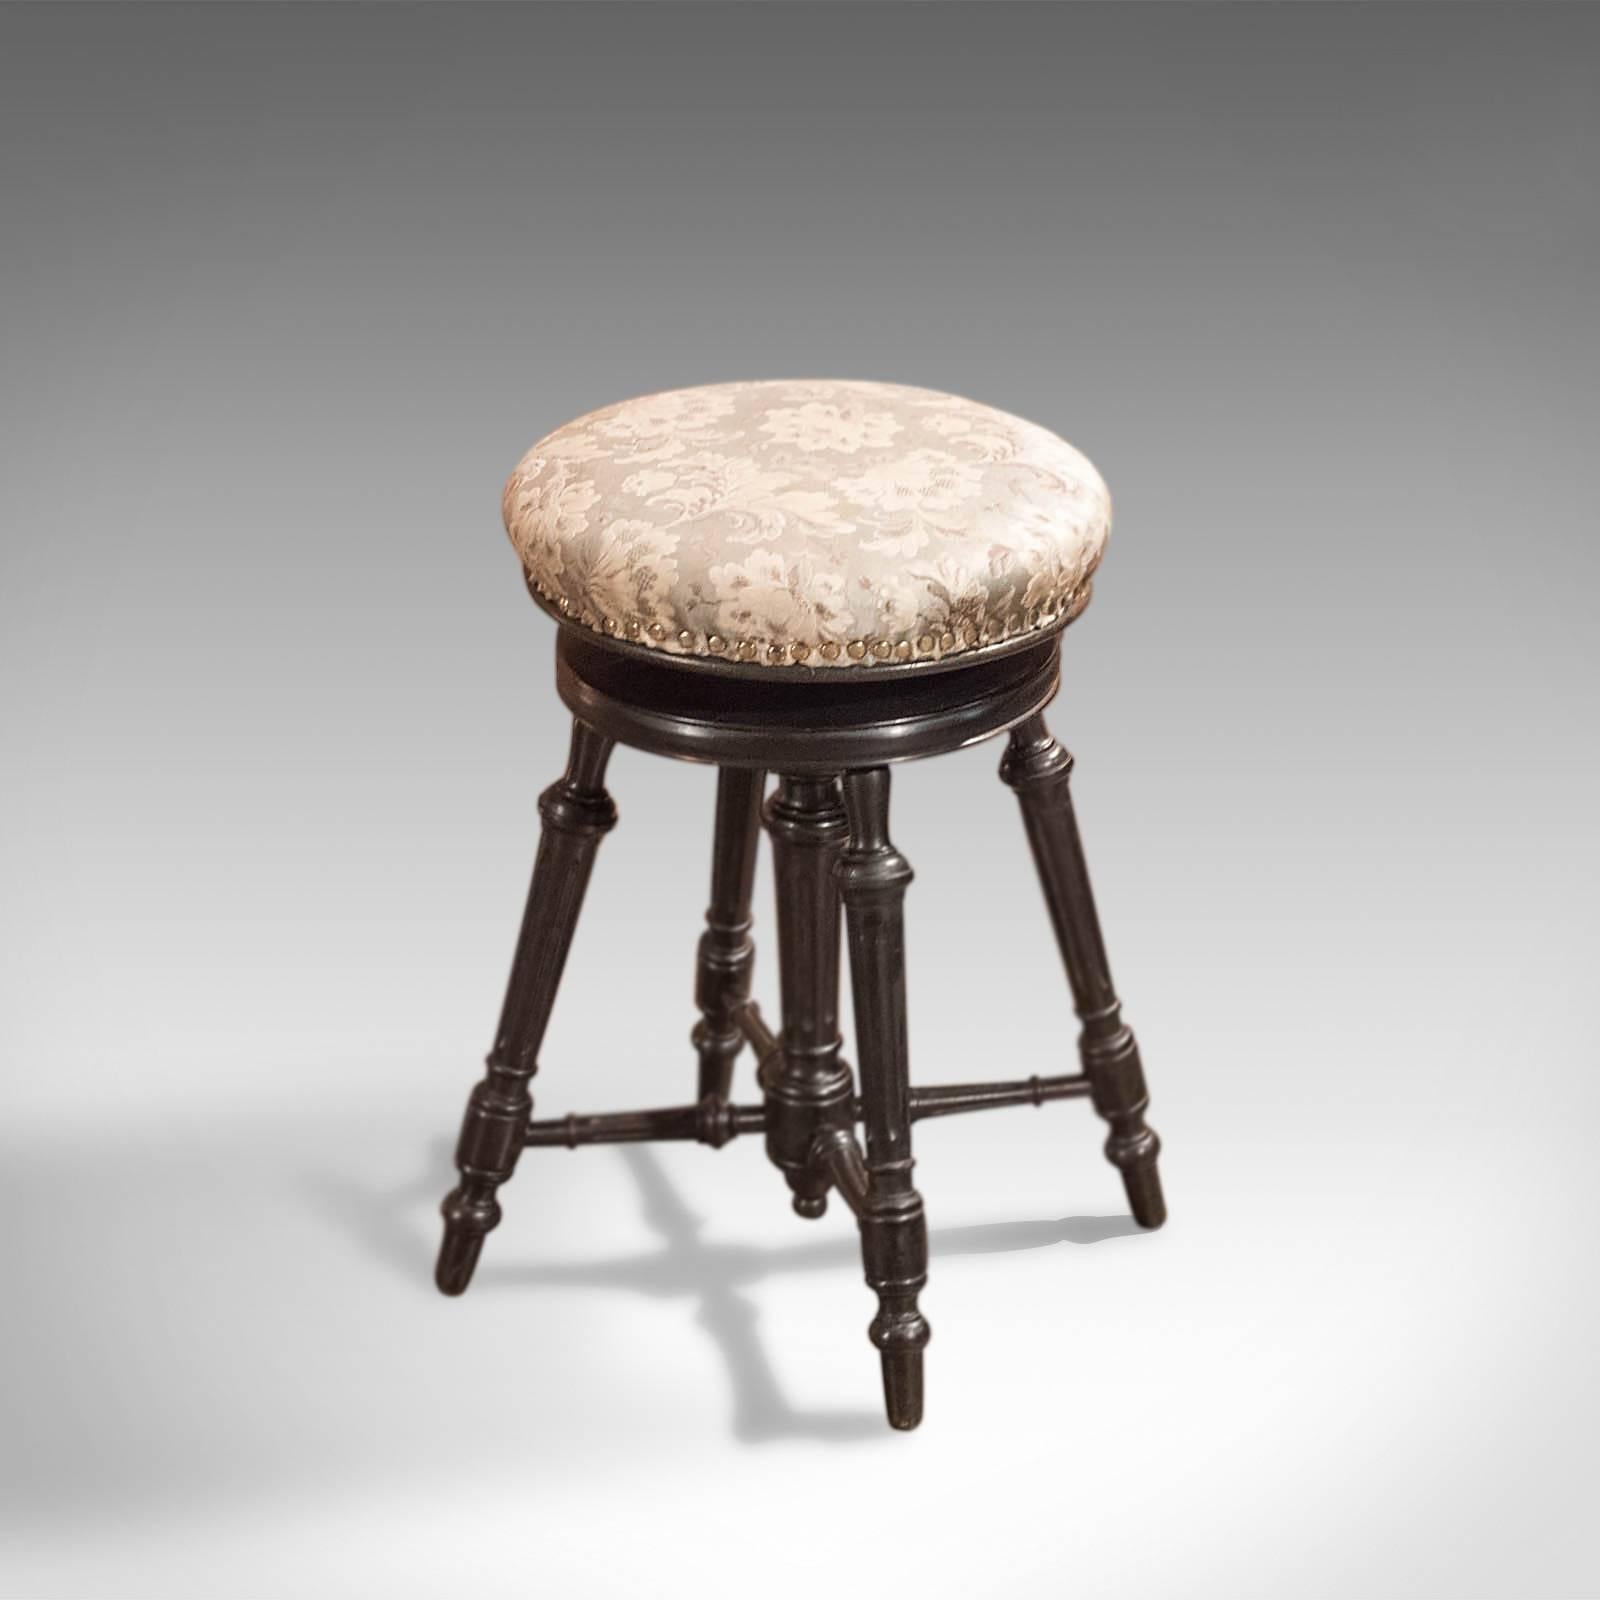 This is an adjustable height, antique piano stool dating to the 19th century, circa 1880.

Finished in an attractive dark waxed finish this stool displays Classic Aesthetic Movement over tones.

Raised on four, splayed, turned and fluted legs